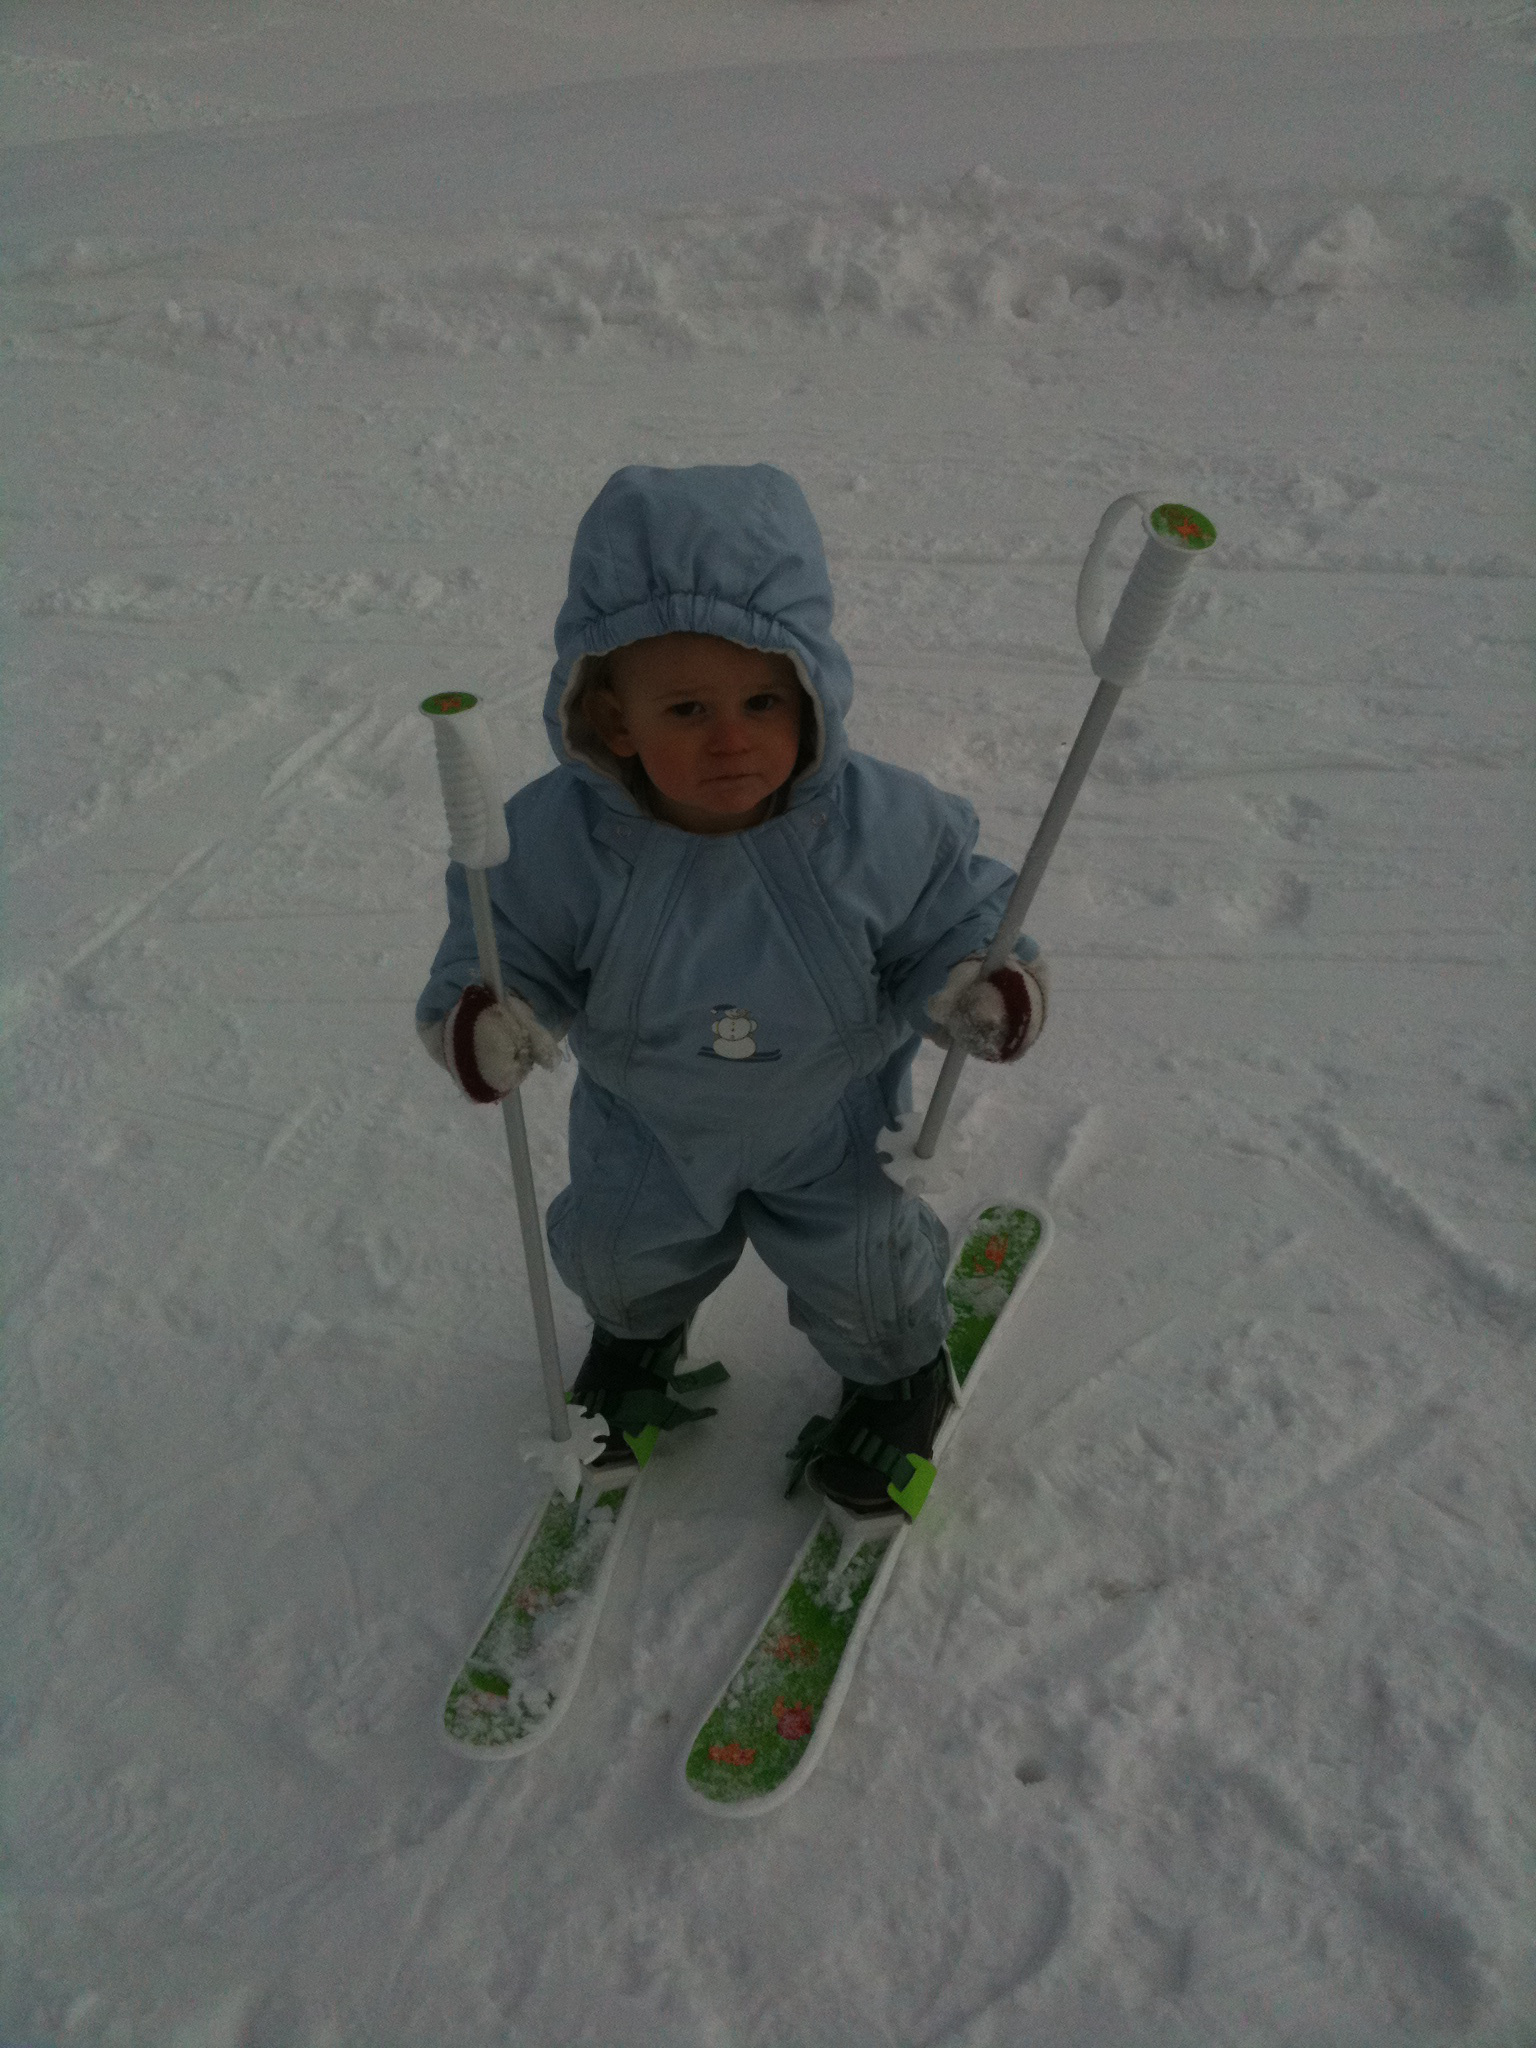 Arvian first time on skis